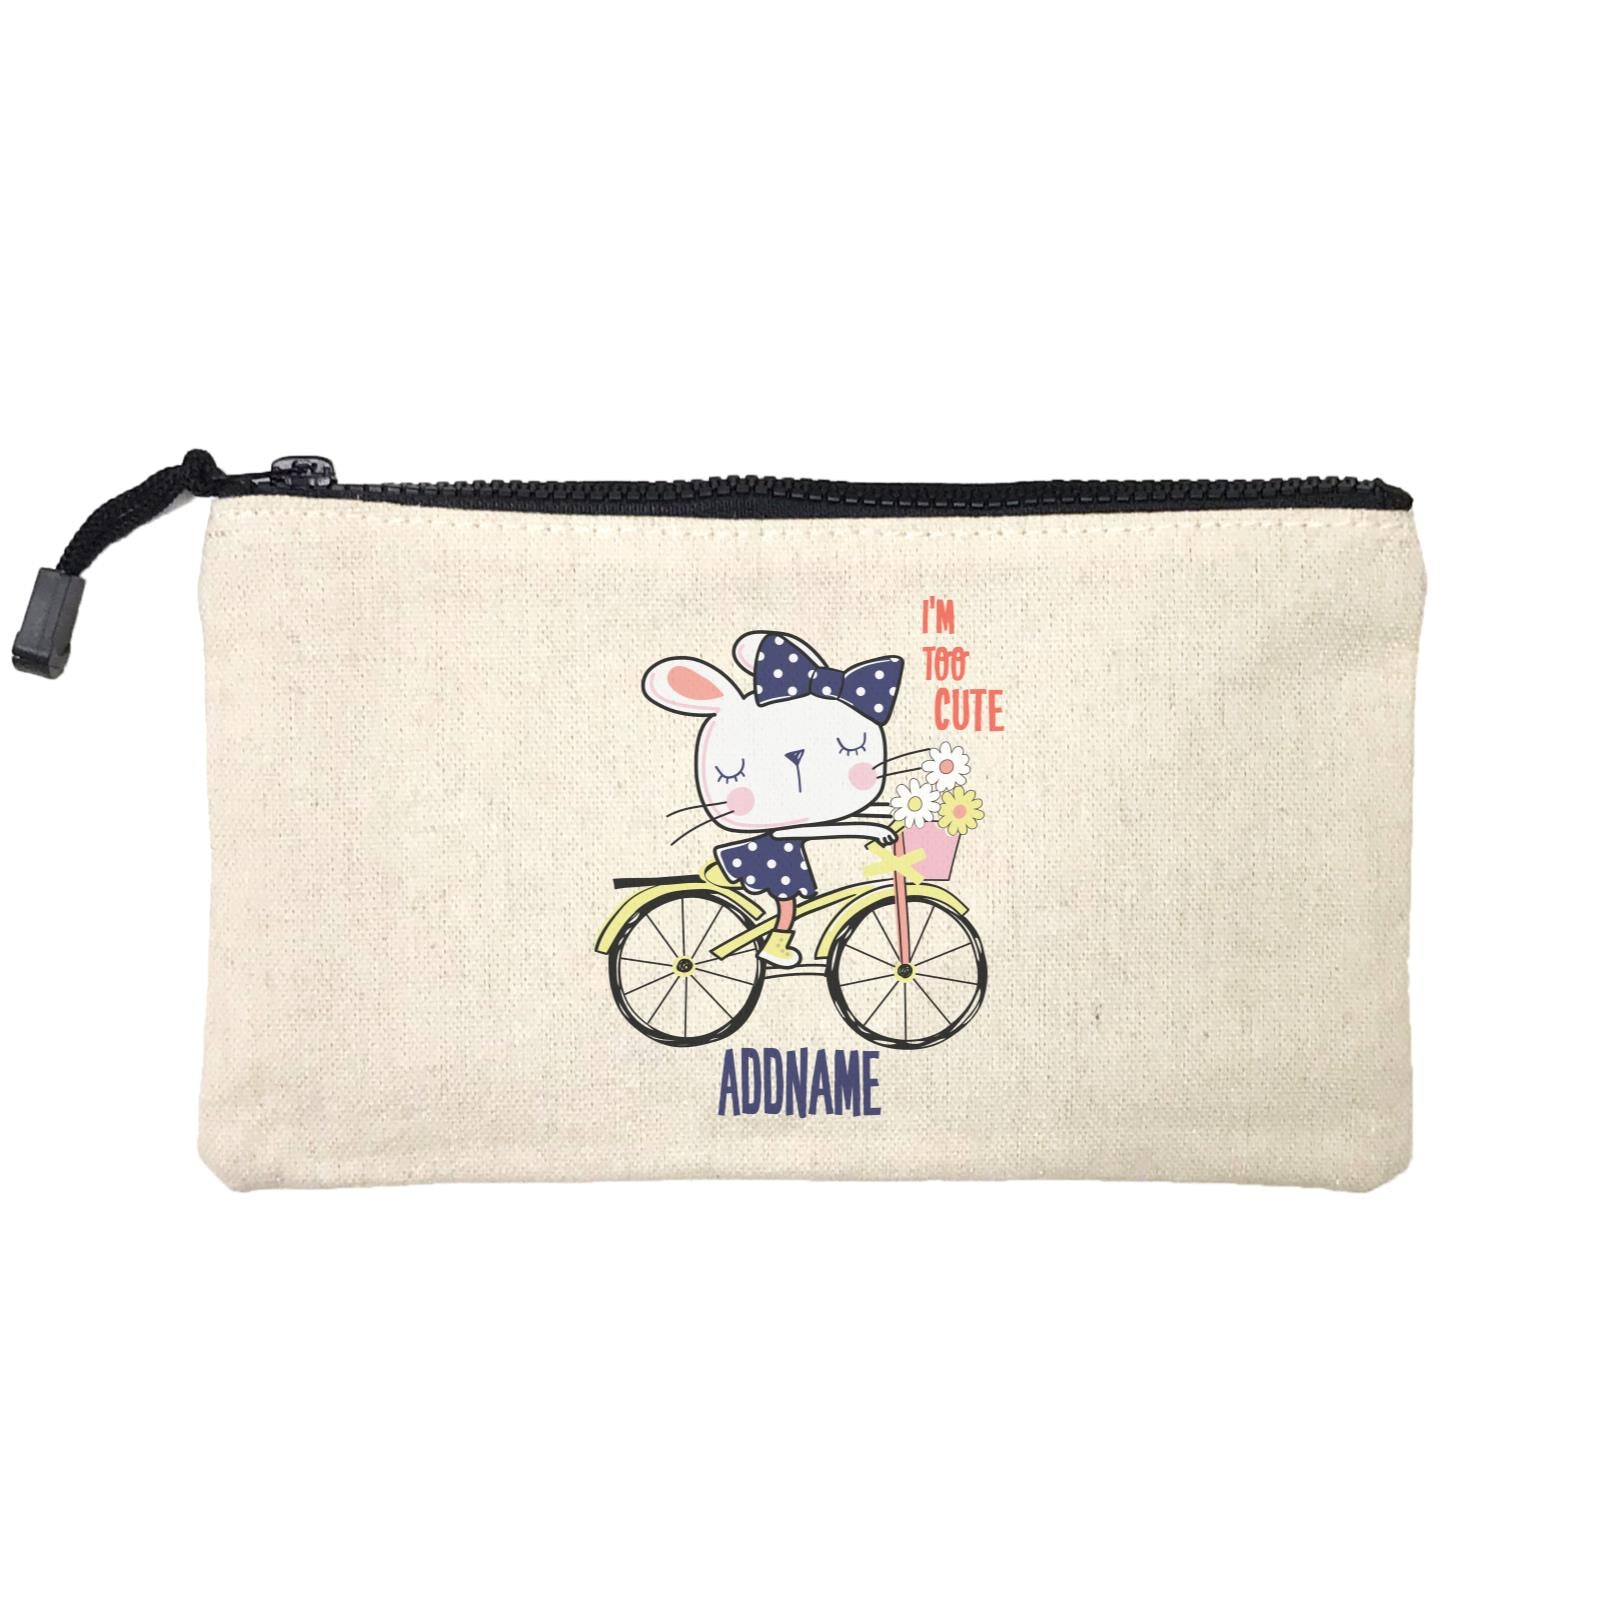 Cool Vibrant Series I'm Too Cute Bunny on Bicycle Addname Mini Accessories Stationery Pouch